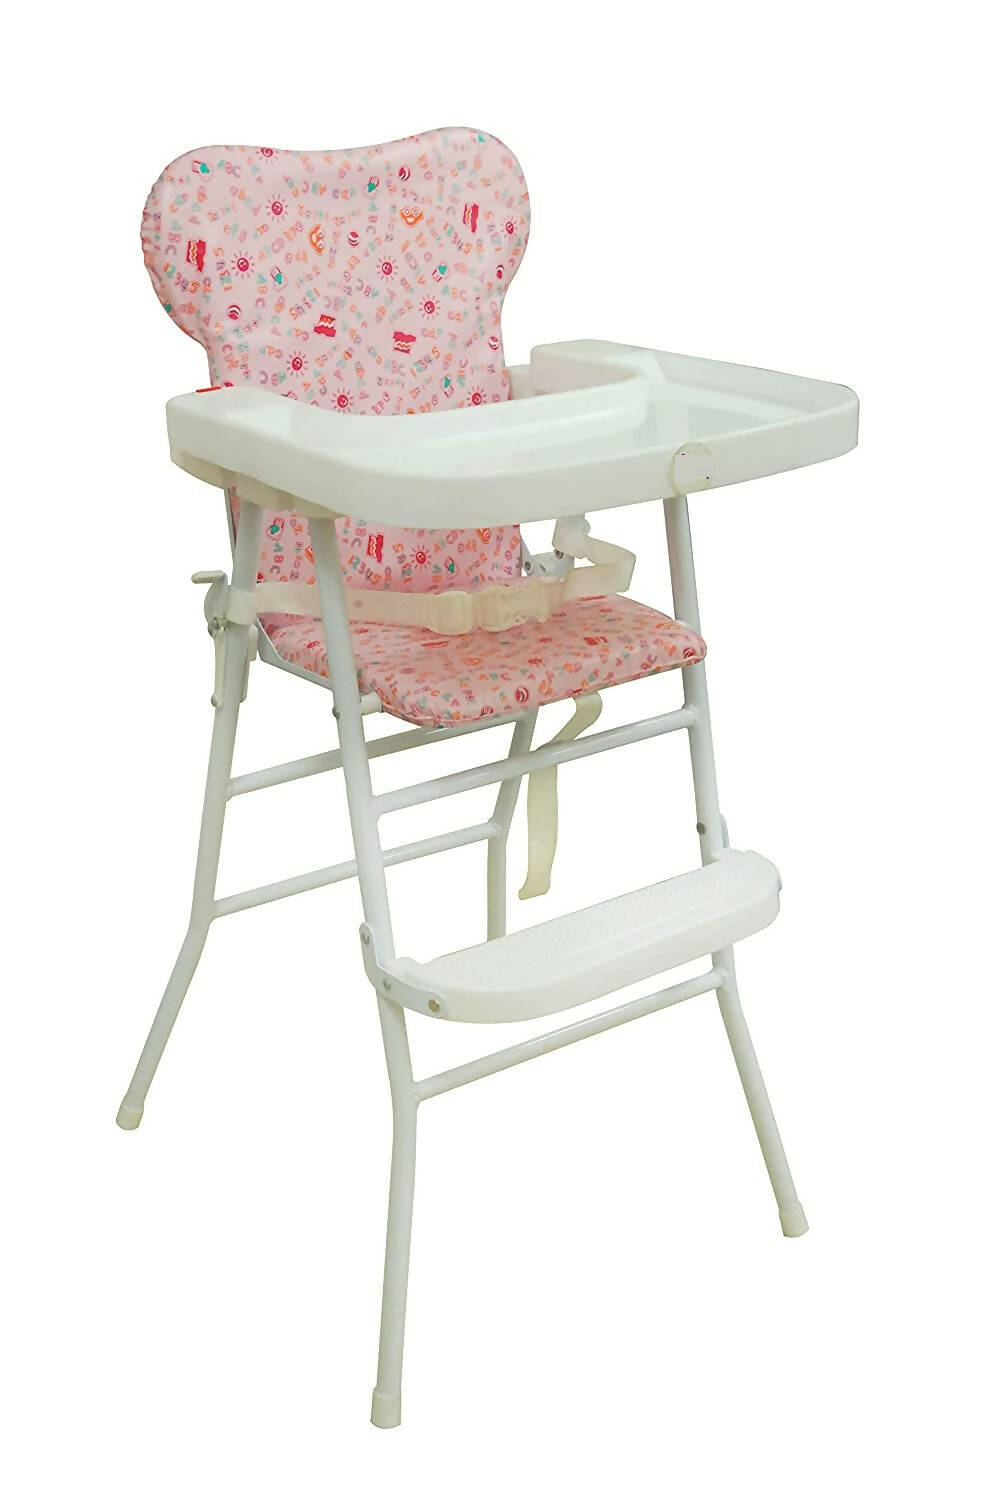 ZOSHOMI Mealtime High Chair with Soft Cushion and Protection Belt for Baby (Pink) - PyaraBaby